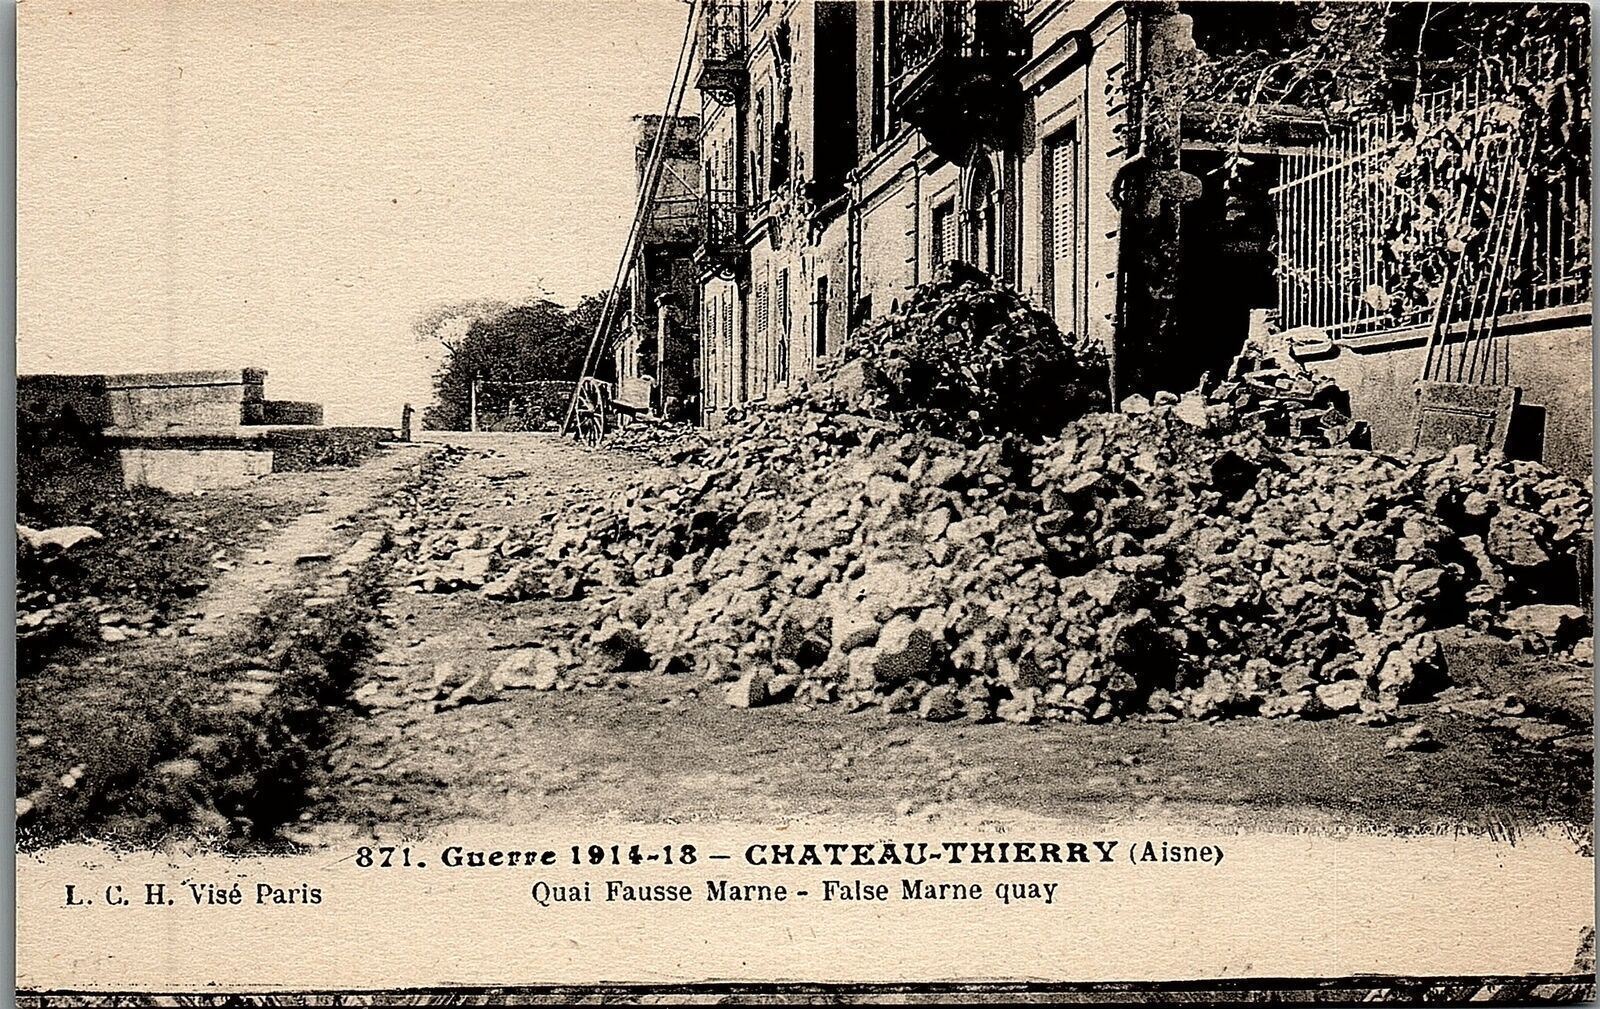 1918 WWI BOMBING DAMAGE CHATEAU-THIERRY AISNE FRANCE LITHOGRAPHIC POSTCARD 34-17